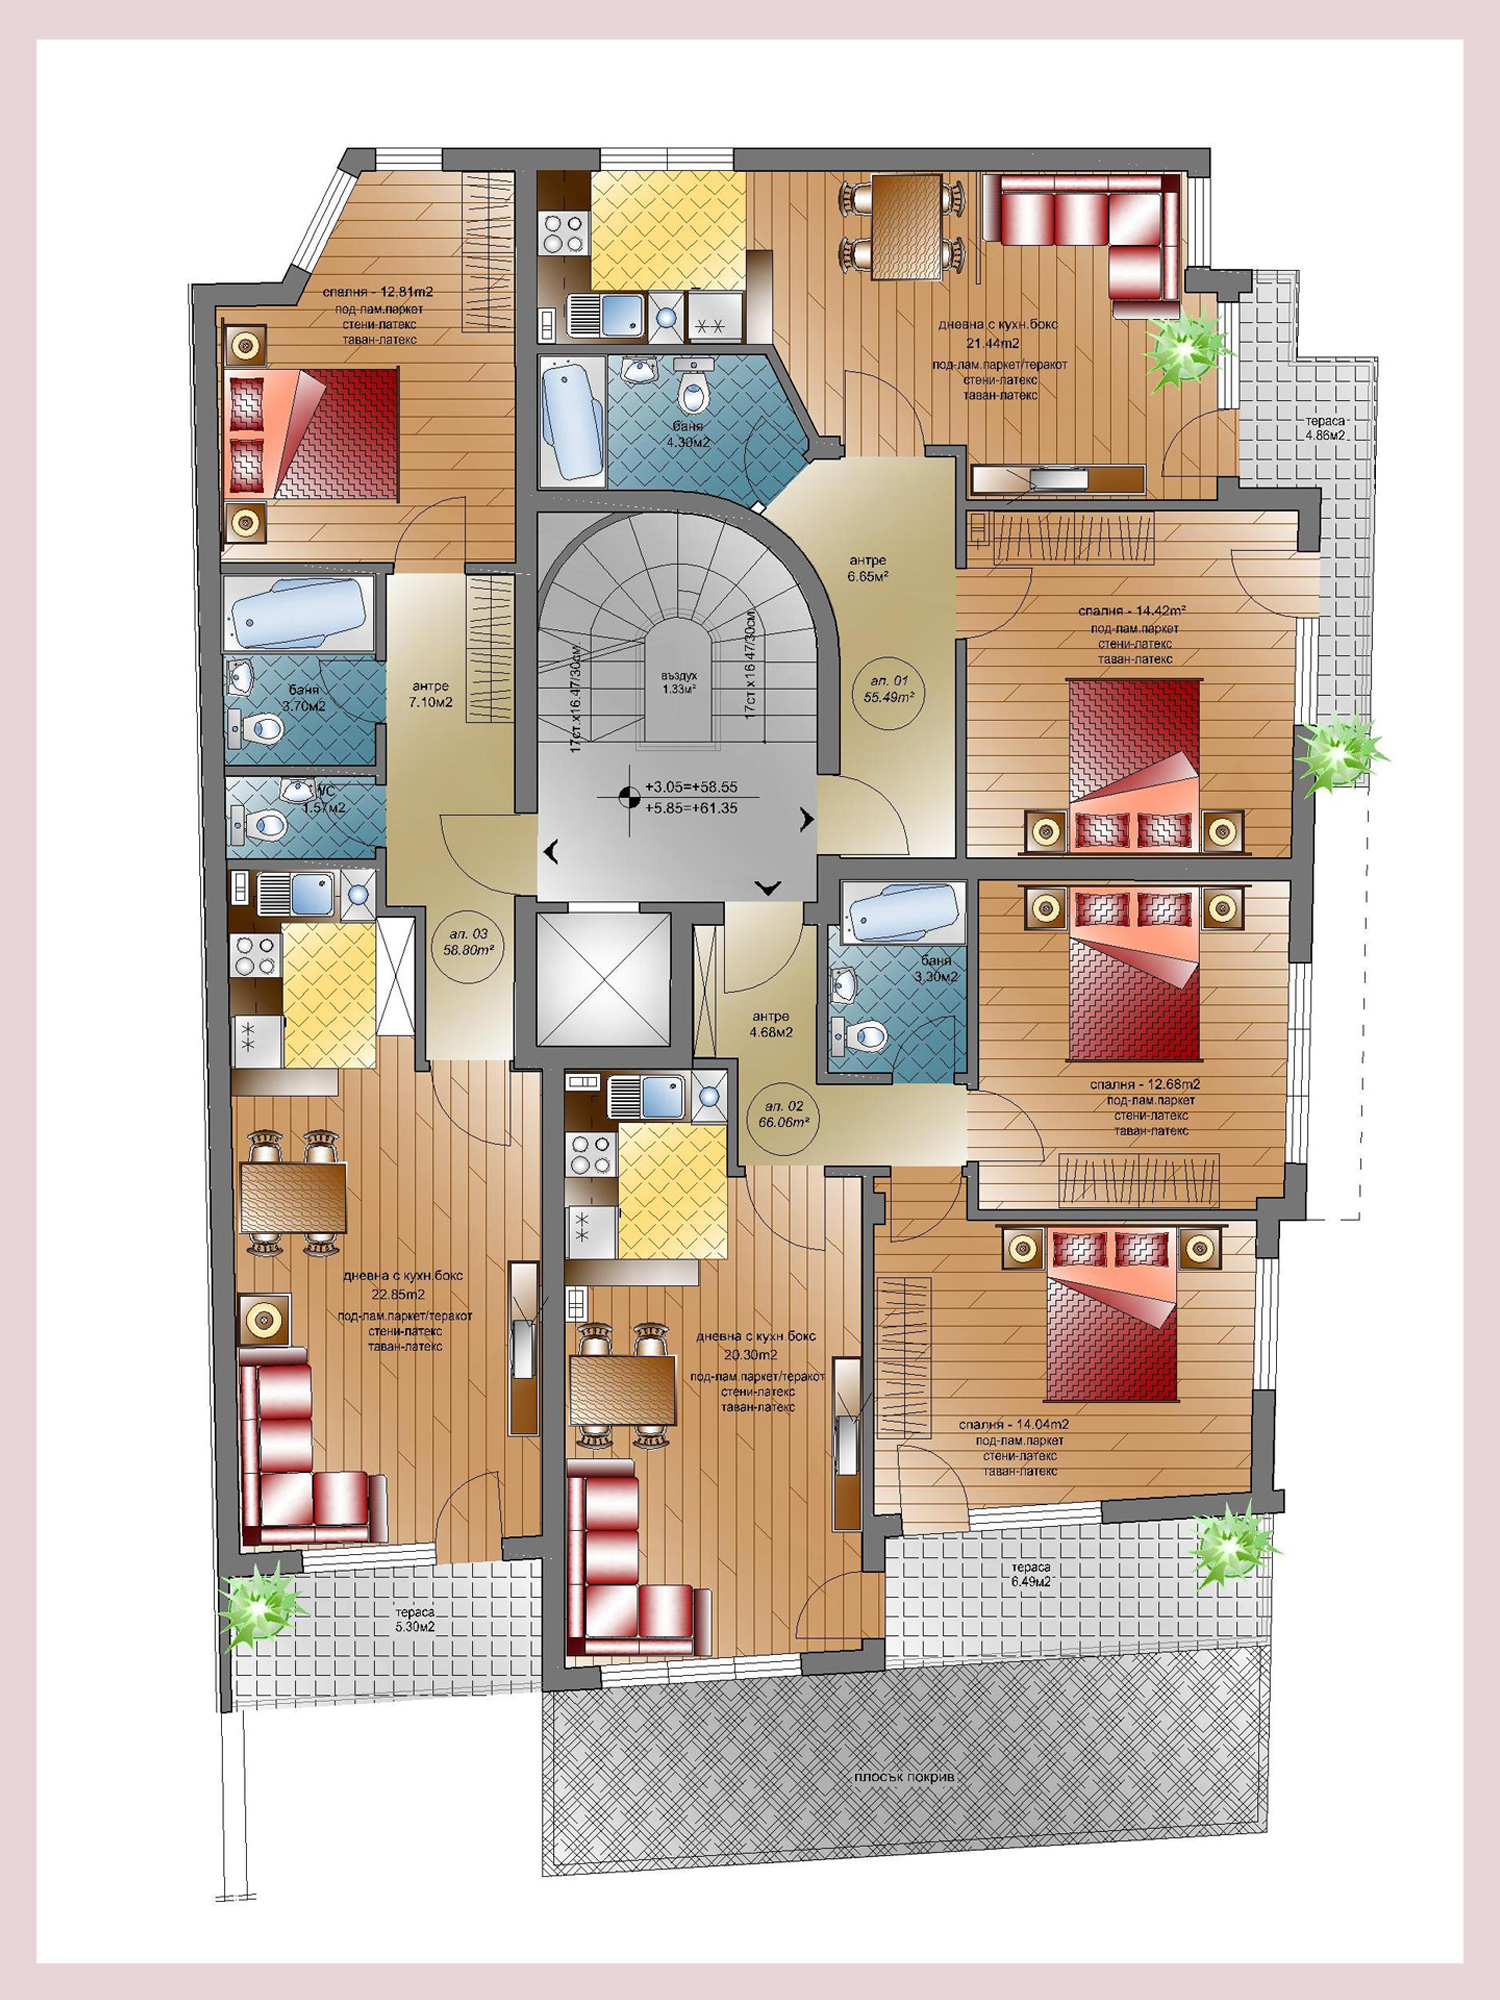 Garage Plans With Apartment On Main Floor